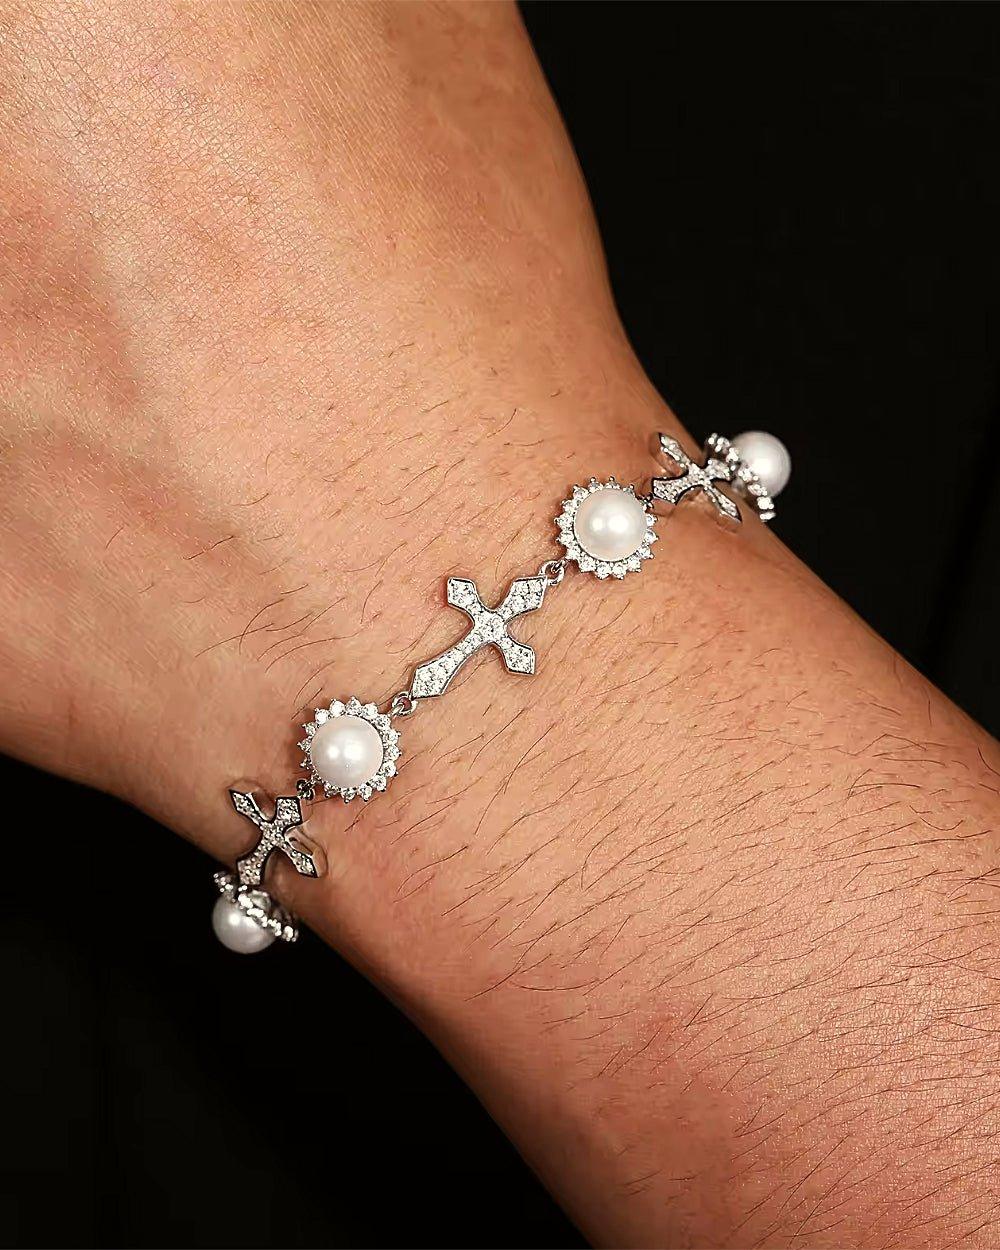 MOISSANITE ICY CROSSES & PEARLS BRACELET. - WHITE GOLD - DRIP IN THE JEWEL